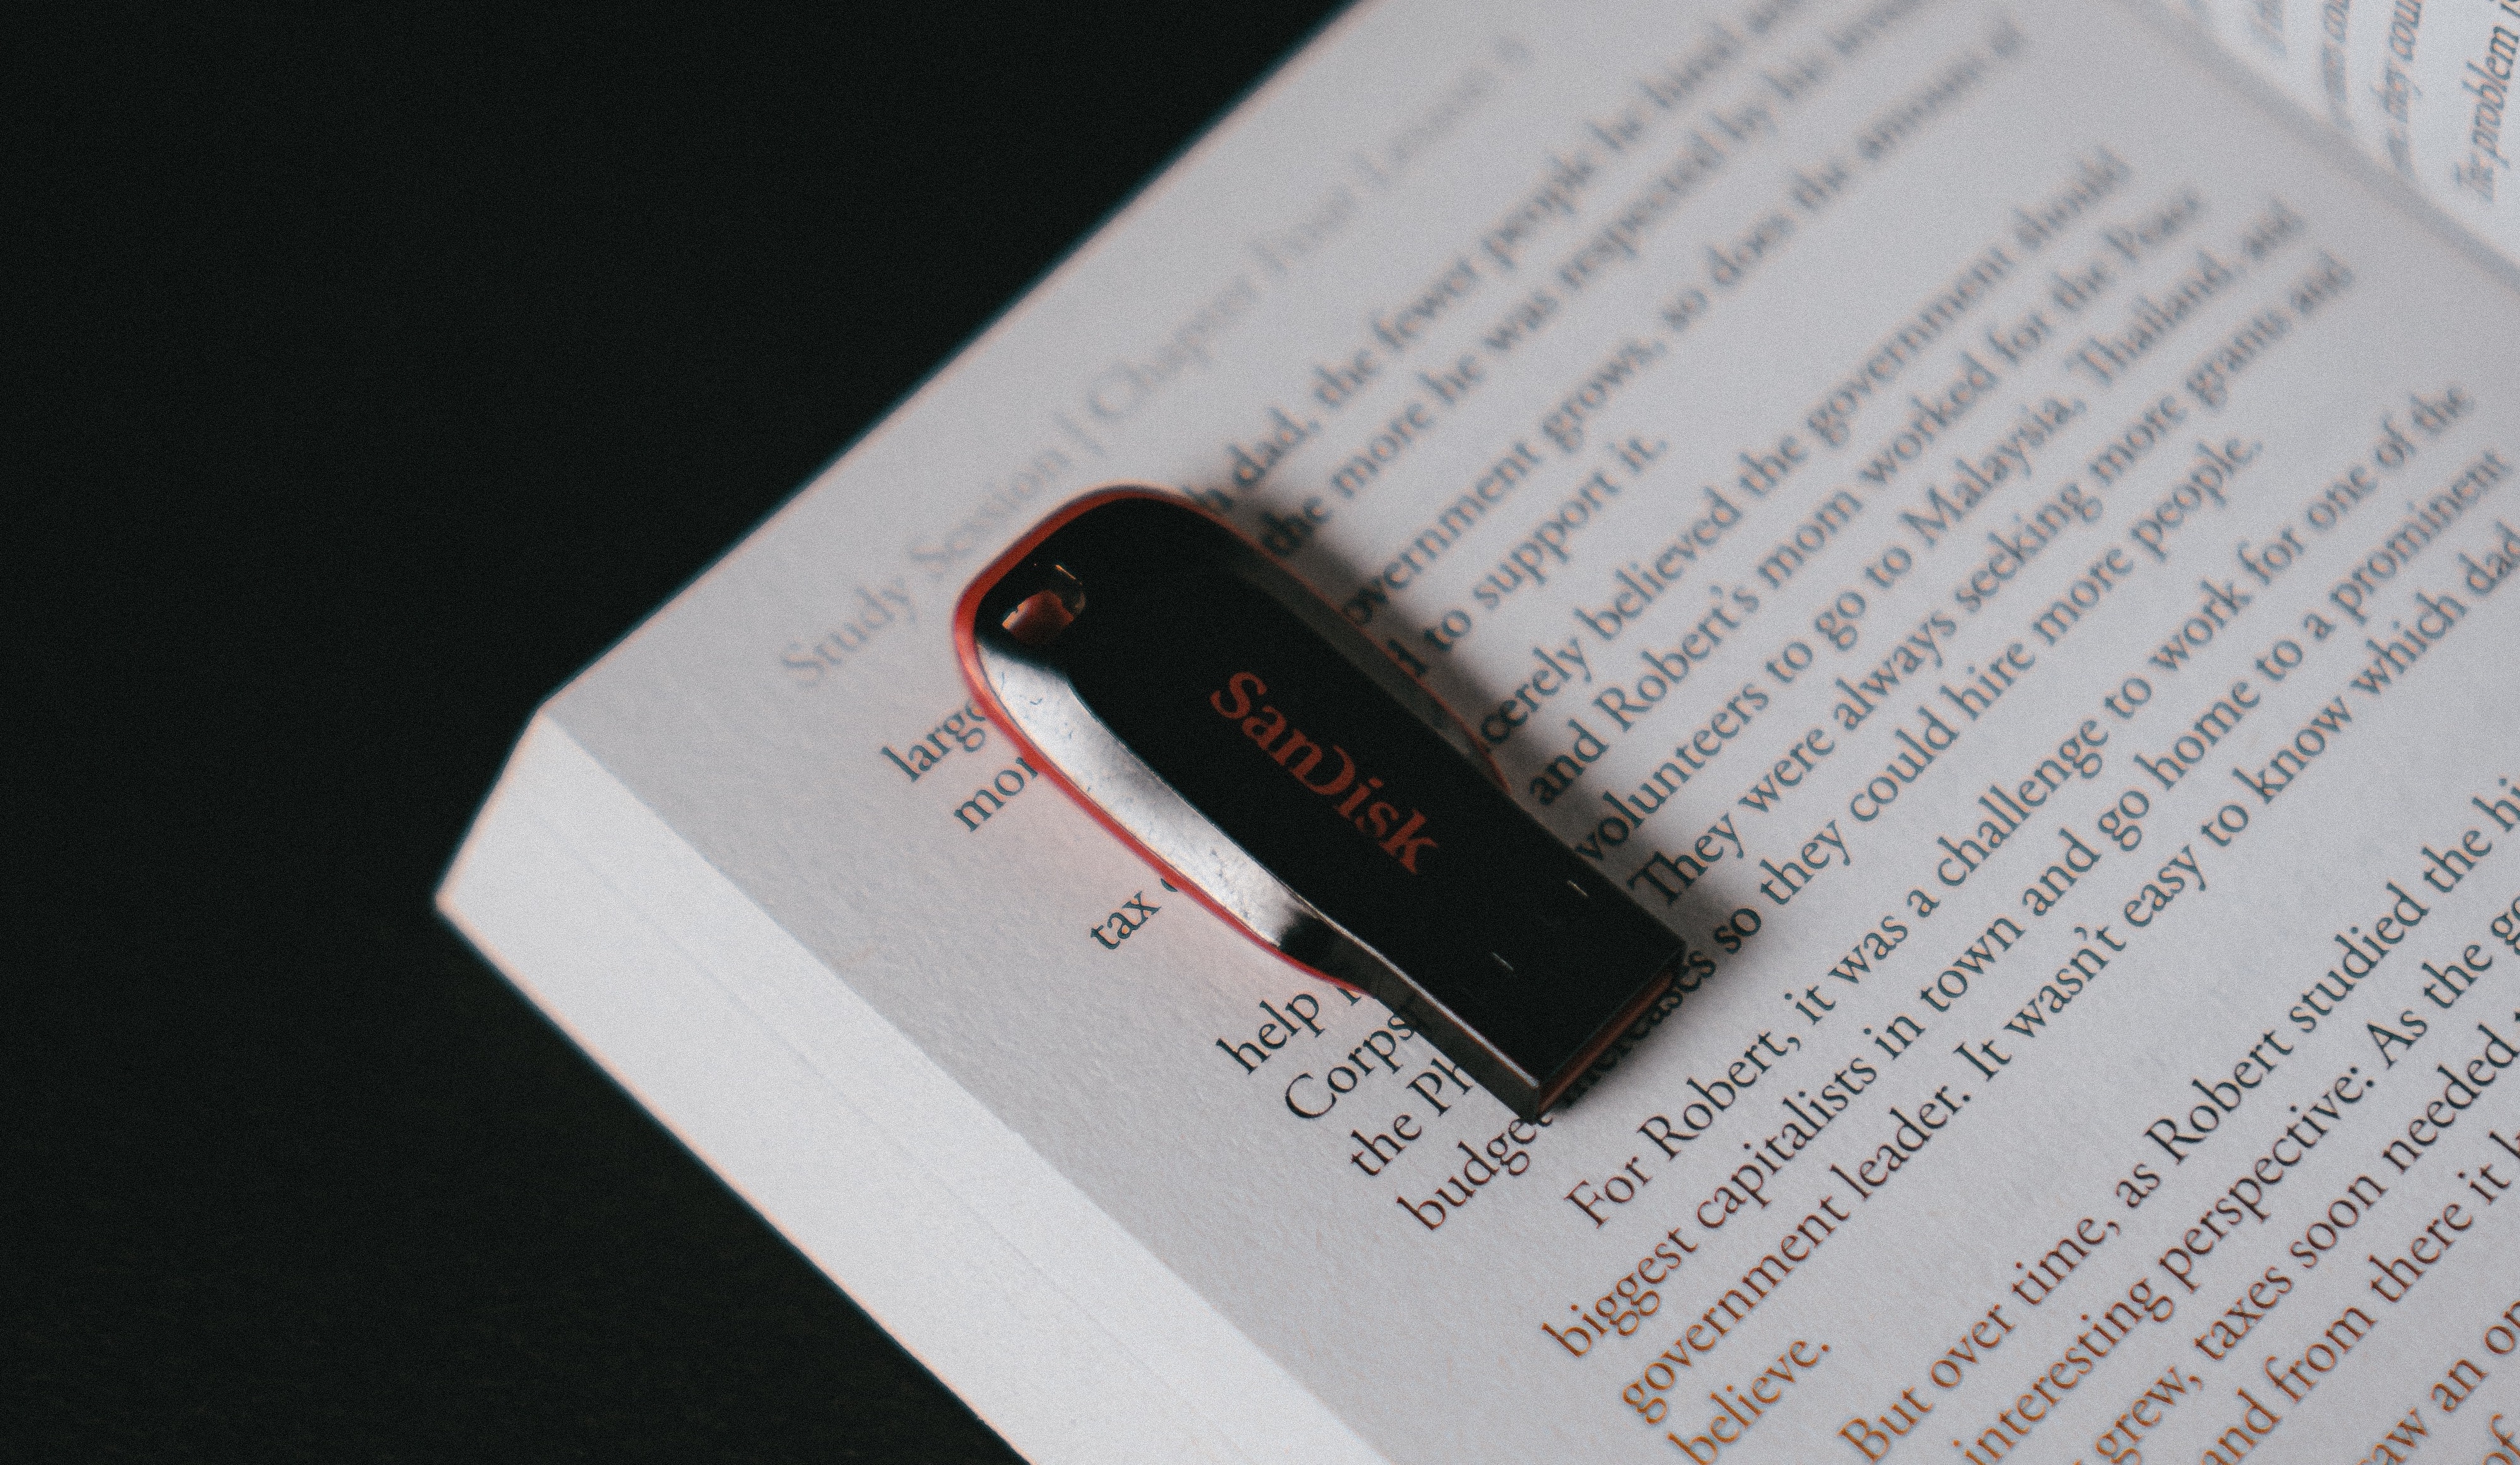 A USB flash drive rests on an open book.